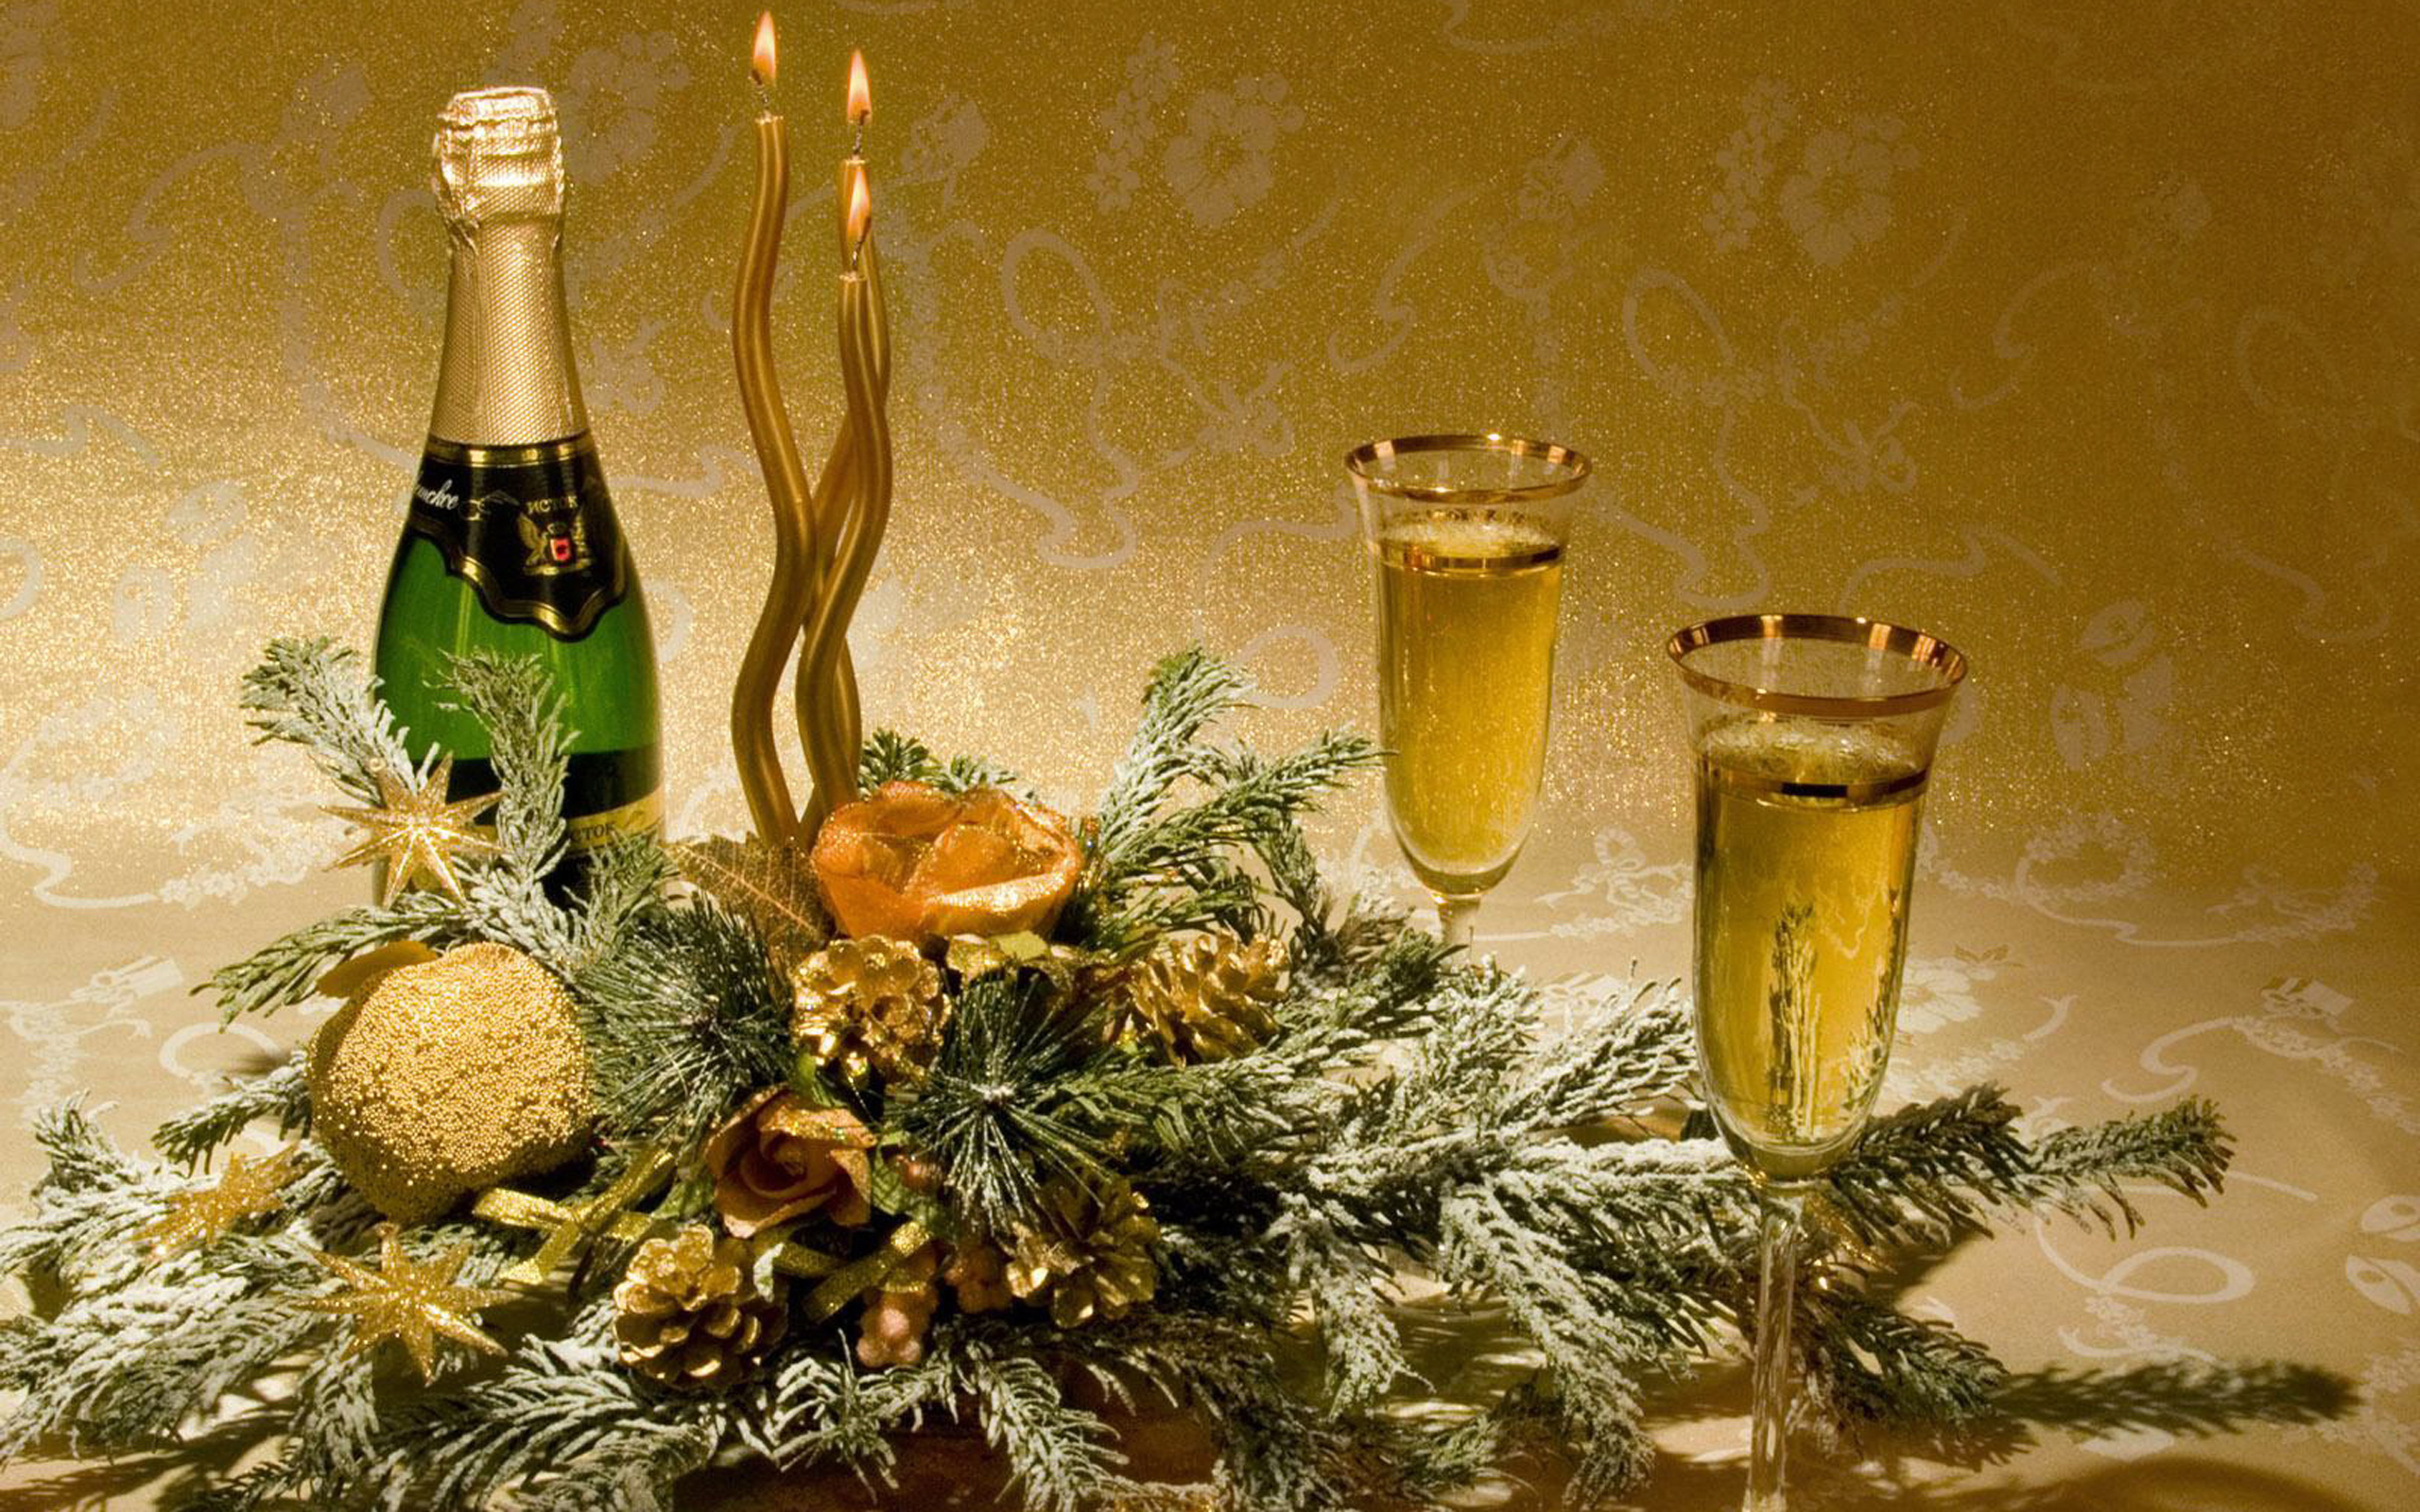 vine, holidays, new year, candles, drinks, still life, yellow